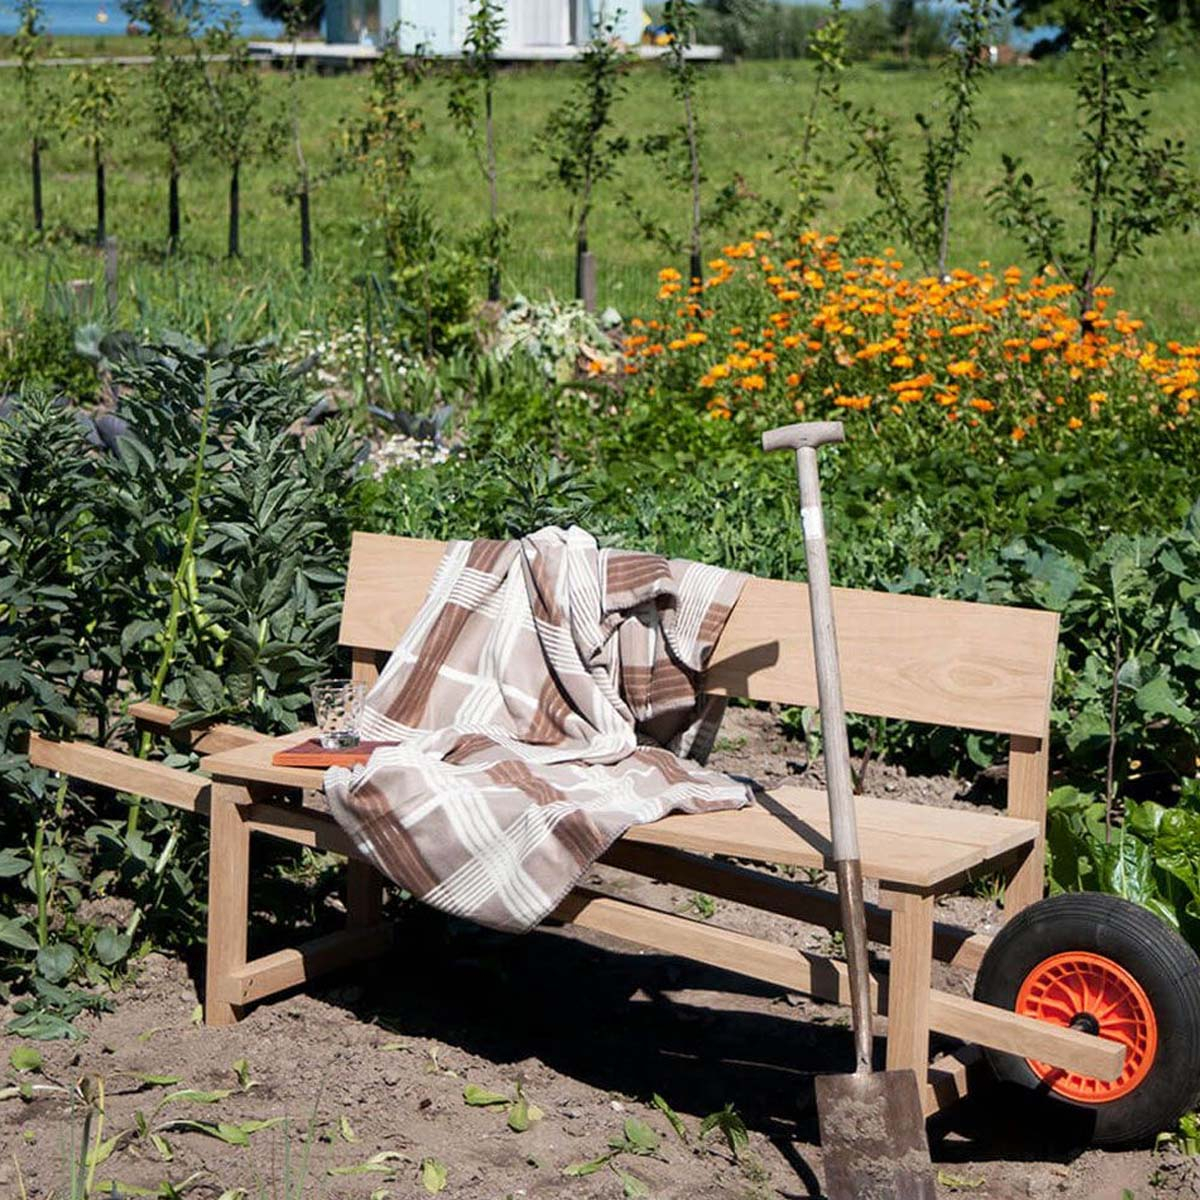 Weltevree Wheelbench, the surprising combination of familiar elements strengthens the active outdoor feel of the bench